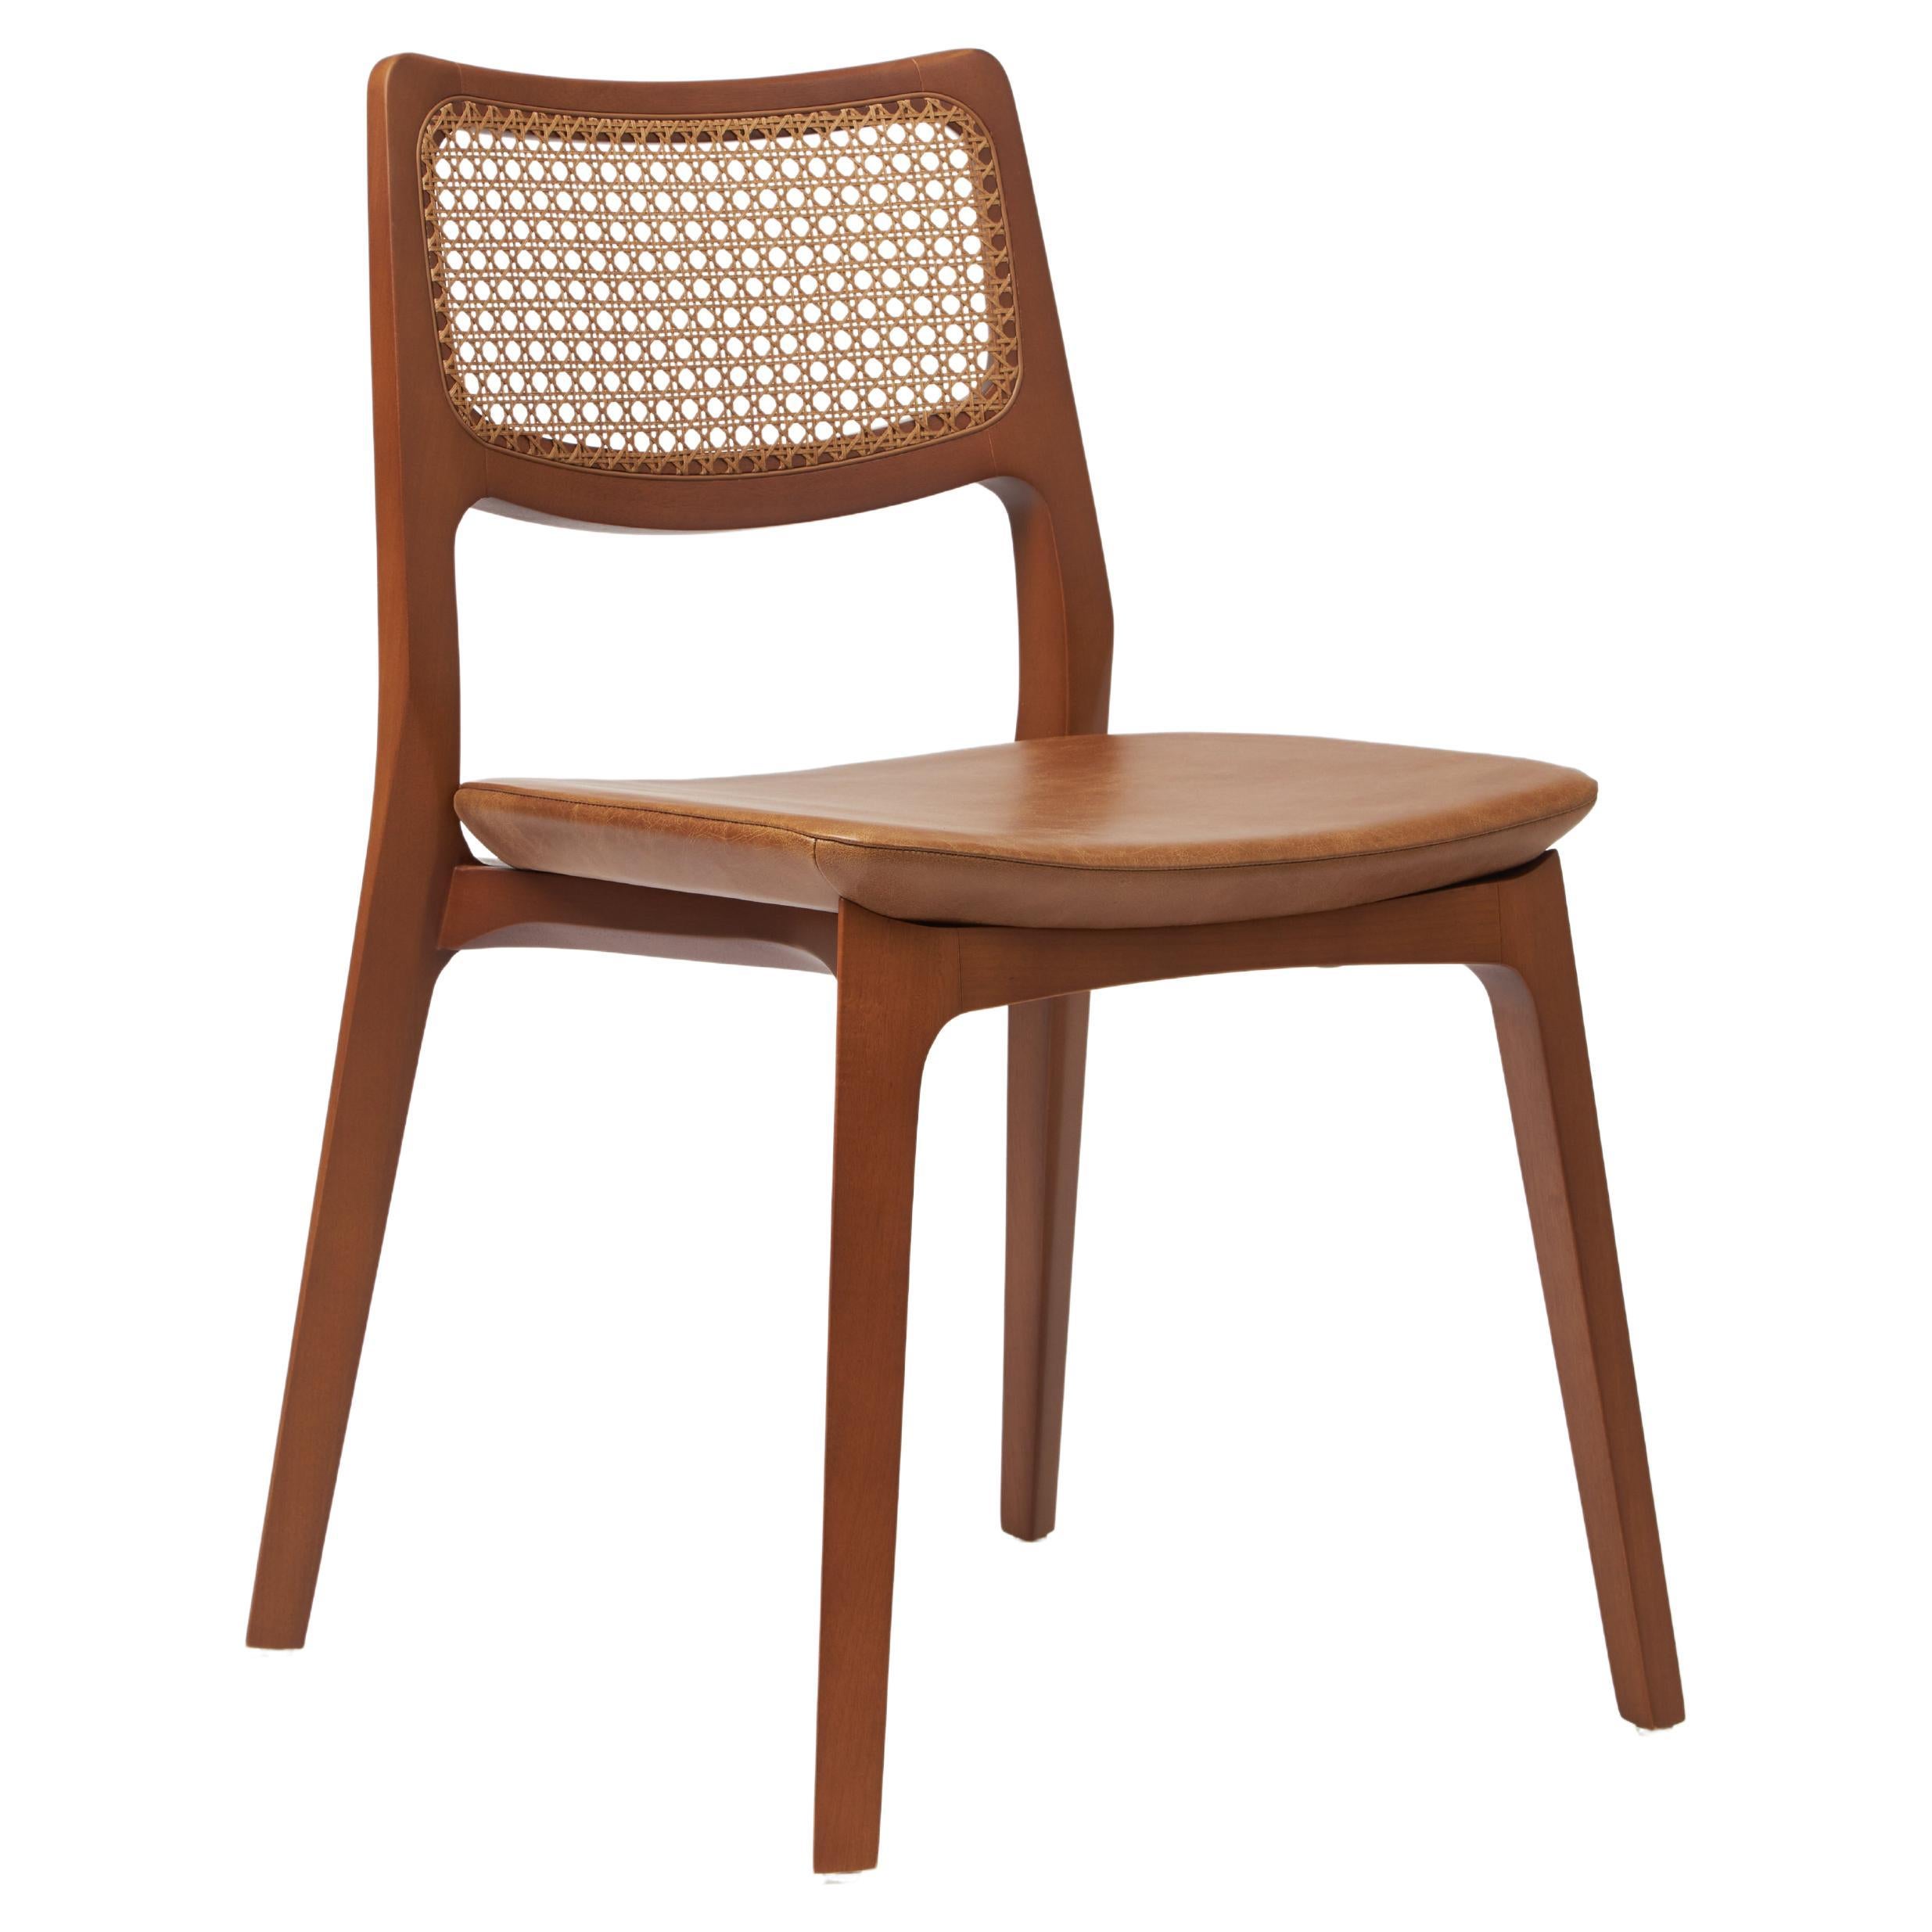 Modern Style Aurora Chair Sculpted in Walnut Finish No Arms, leather seating For Sale